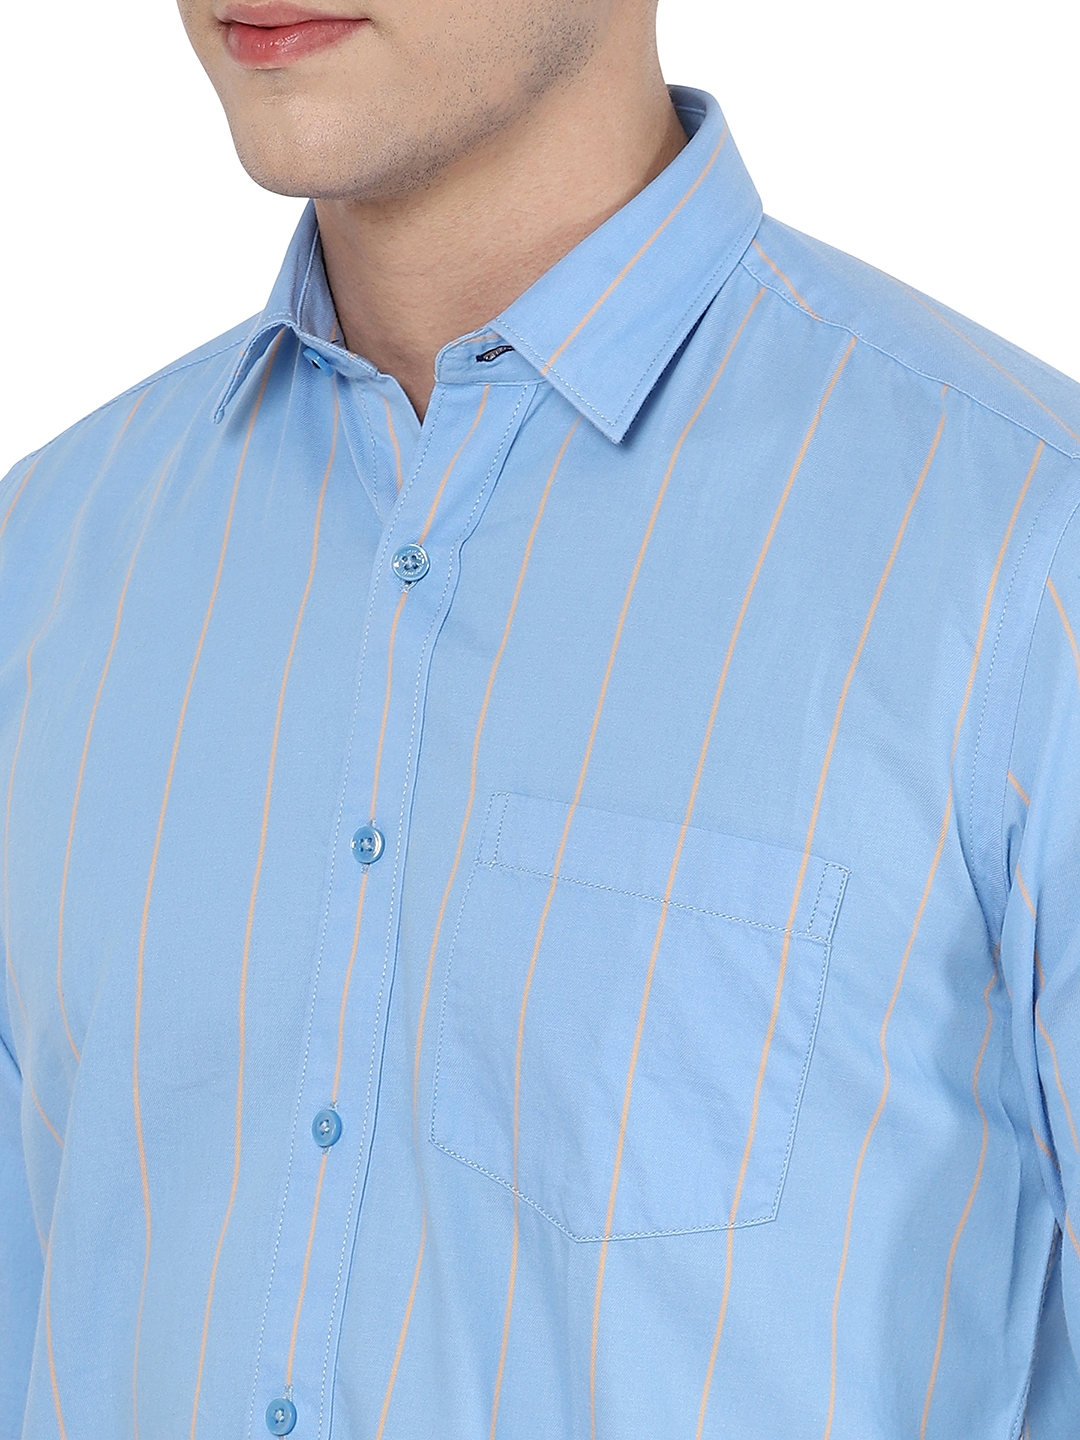 Greenfibre | Light Blue Striped Slim Fit Casual Shirt | Greenfibre 4